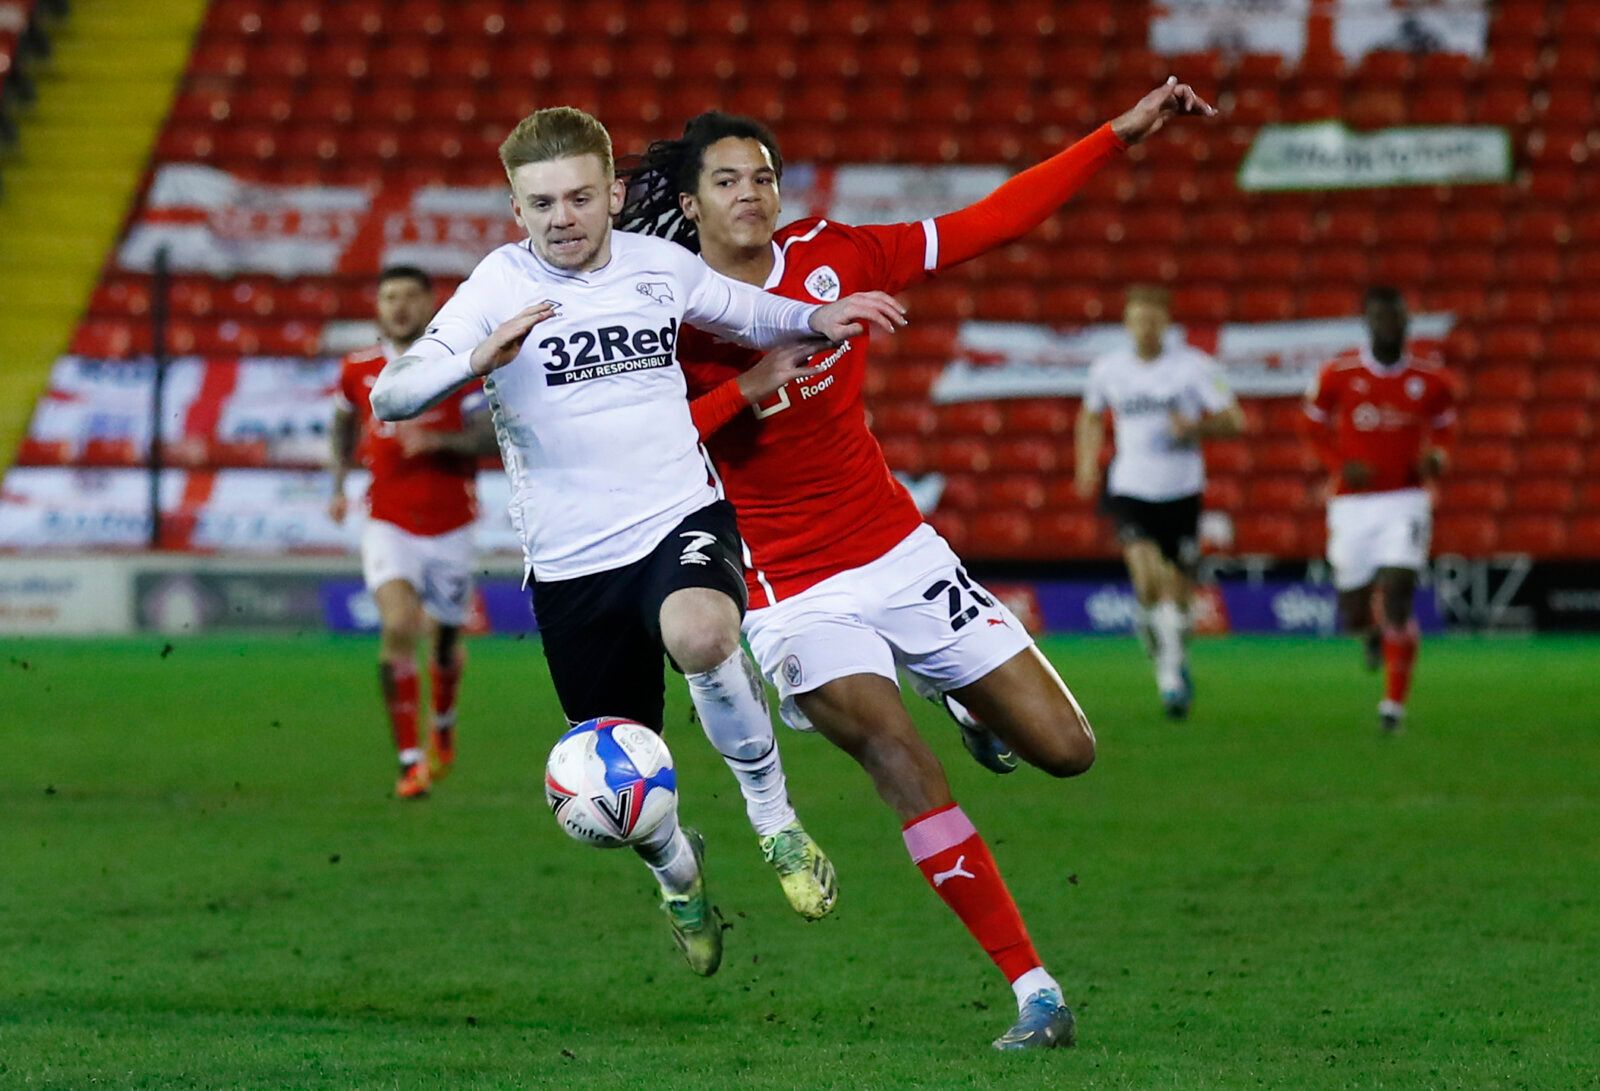 Soccer Football - Championship - Barnsley v Derby County - Oakwell, Barnsley, Britain - March 10, 2021 Barnsley's Toby Sibbick in action with Derby County's Kamil Jozwiak Action Images/Jason Cairnduff EDITORIAL USE ONLY. No use with unauthorized audio, video, data, fixture lists, club/league logos or 'live' services. Online in-match use limited to 75 images, no video emulation. No use in betting, games or single club /league/player publications.  Please contact your account representative for fu